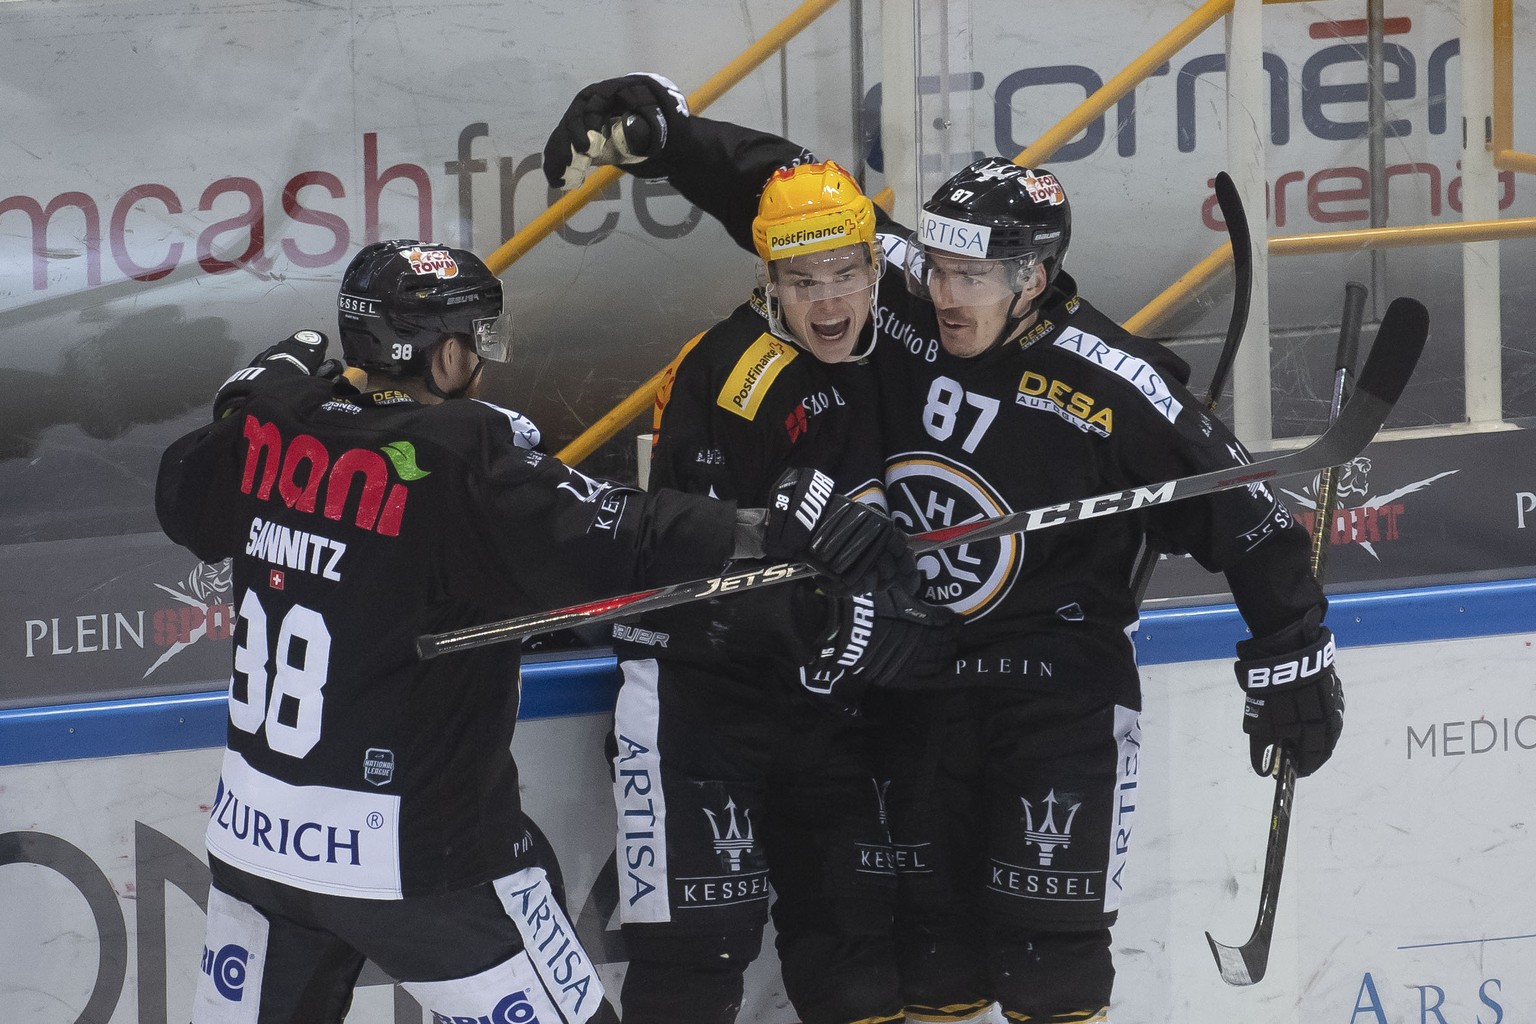 From left: Lugano&#039;s player Raffaele Sannitz, Lugano&#039;s player Gregory Hofmann and Lugano&#039;s player Dario Buergler, celebrate 1-0 goal, during the preliminary round game of National League ...